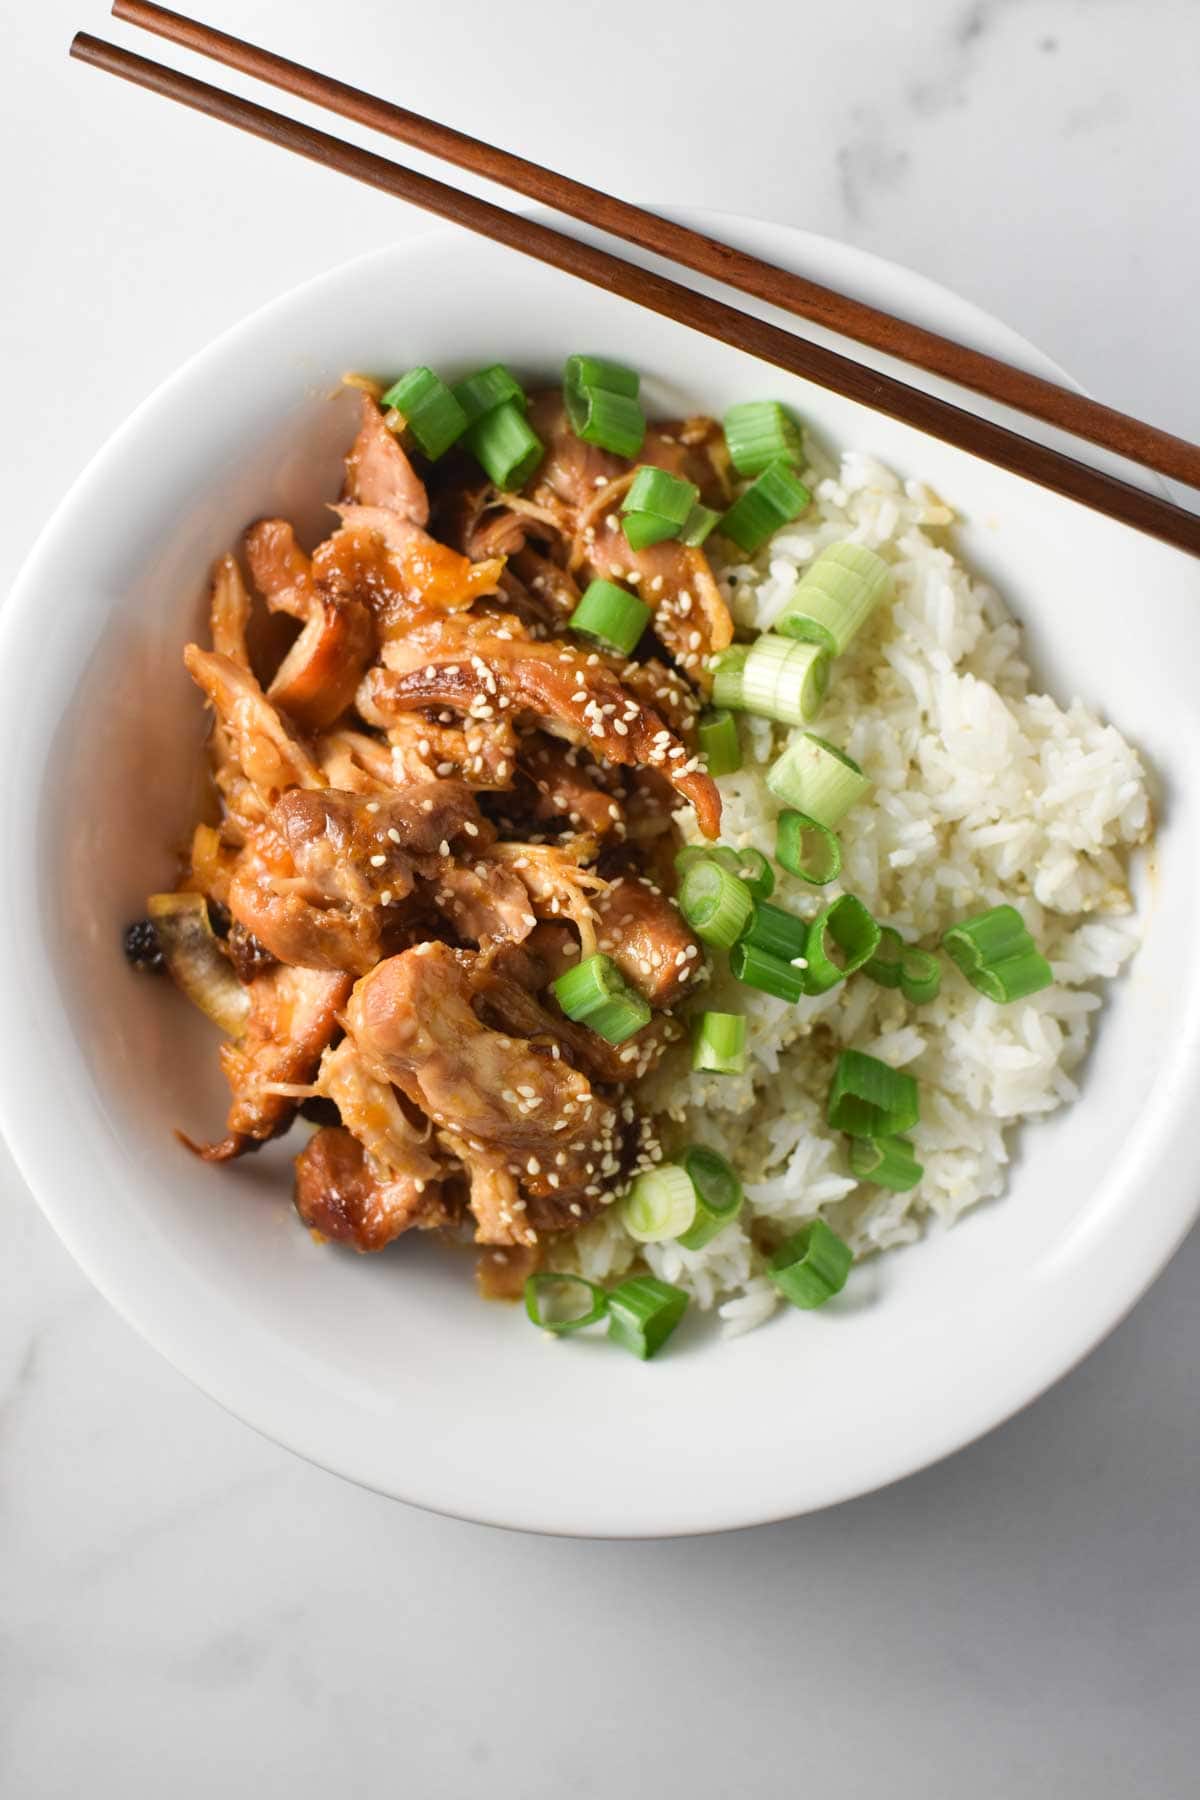 Shredded chicken in apricot sauce next to chopsticks and rice.